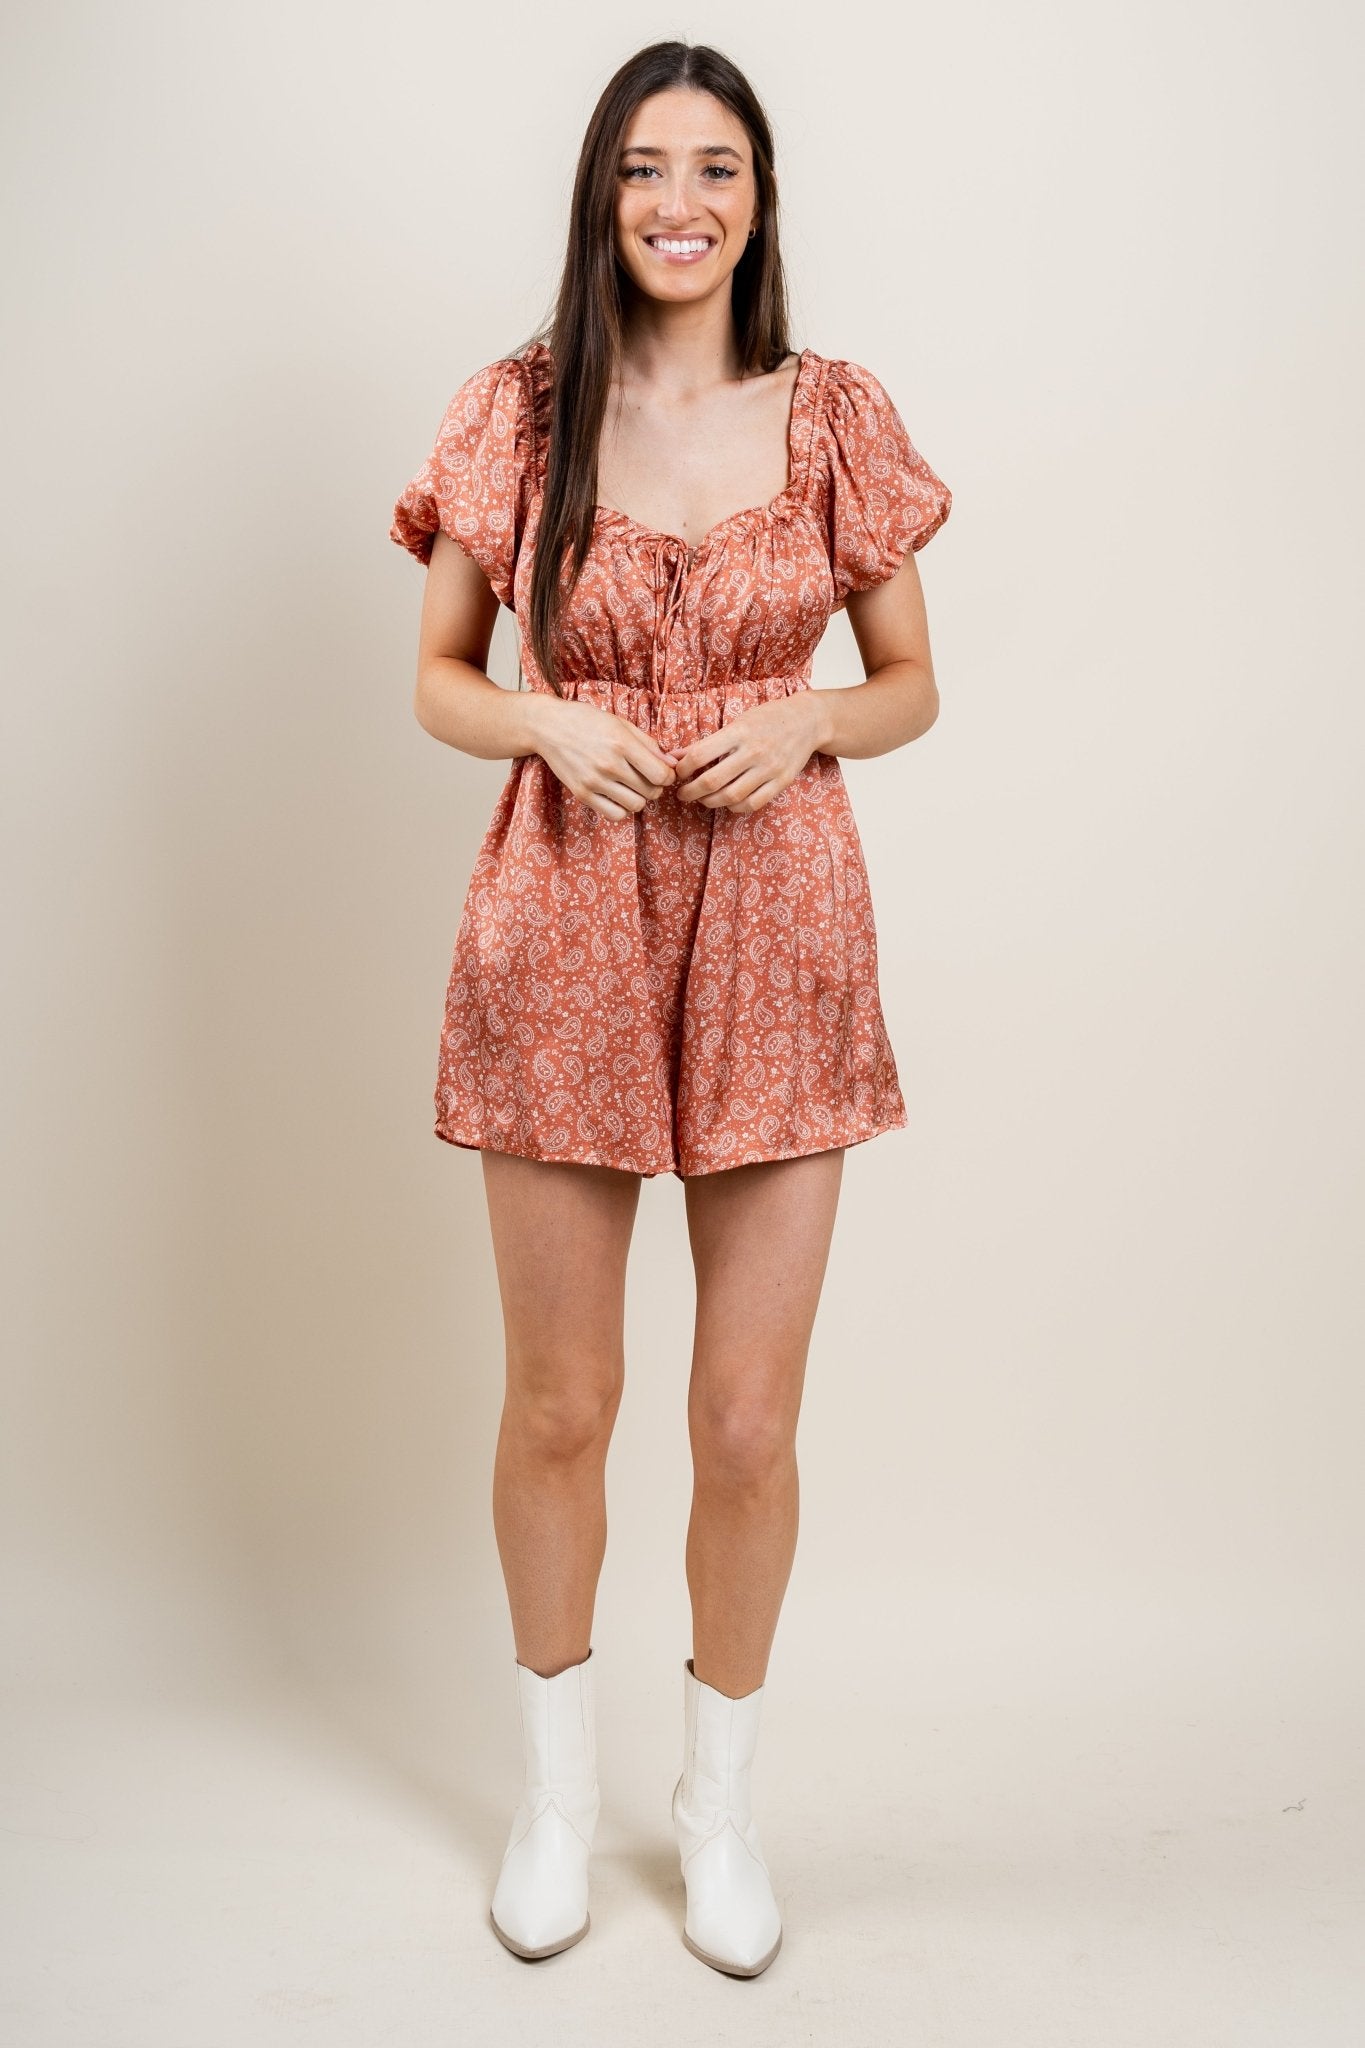 Paisley puff sleeve romper orange Stylish romper - Womens Fashion Rompers & Pantsuits at Lush Fashion Lounge Boutique in Oklahoma City